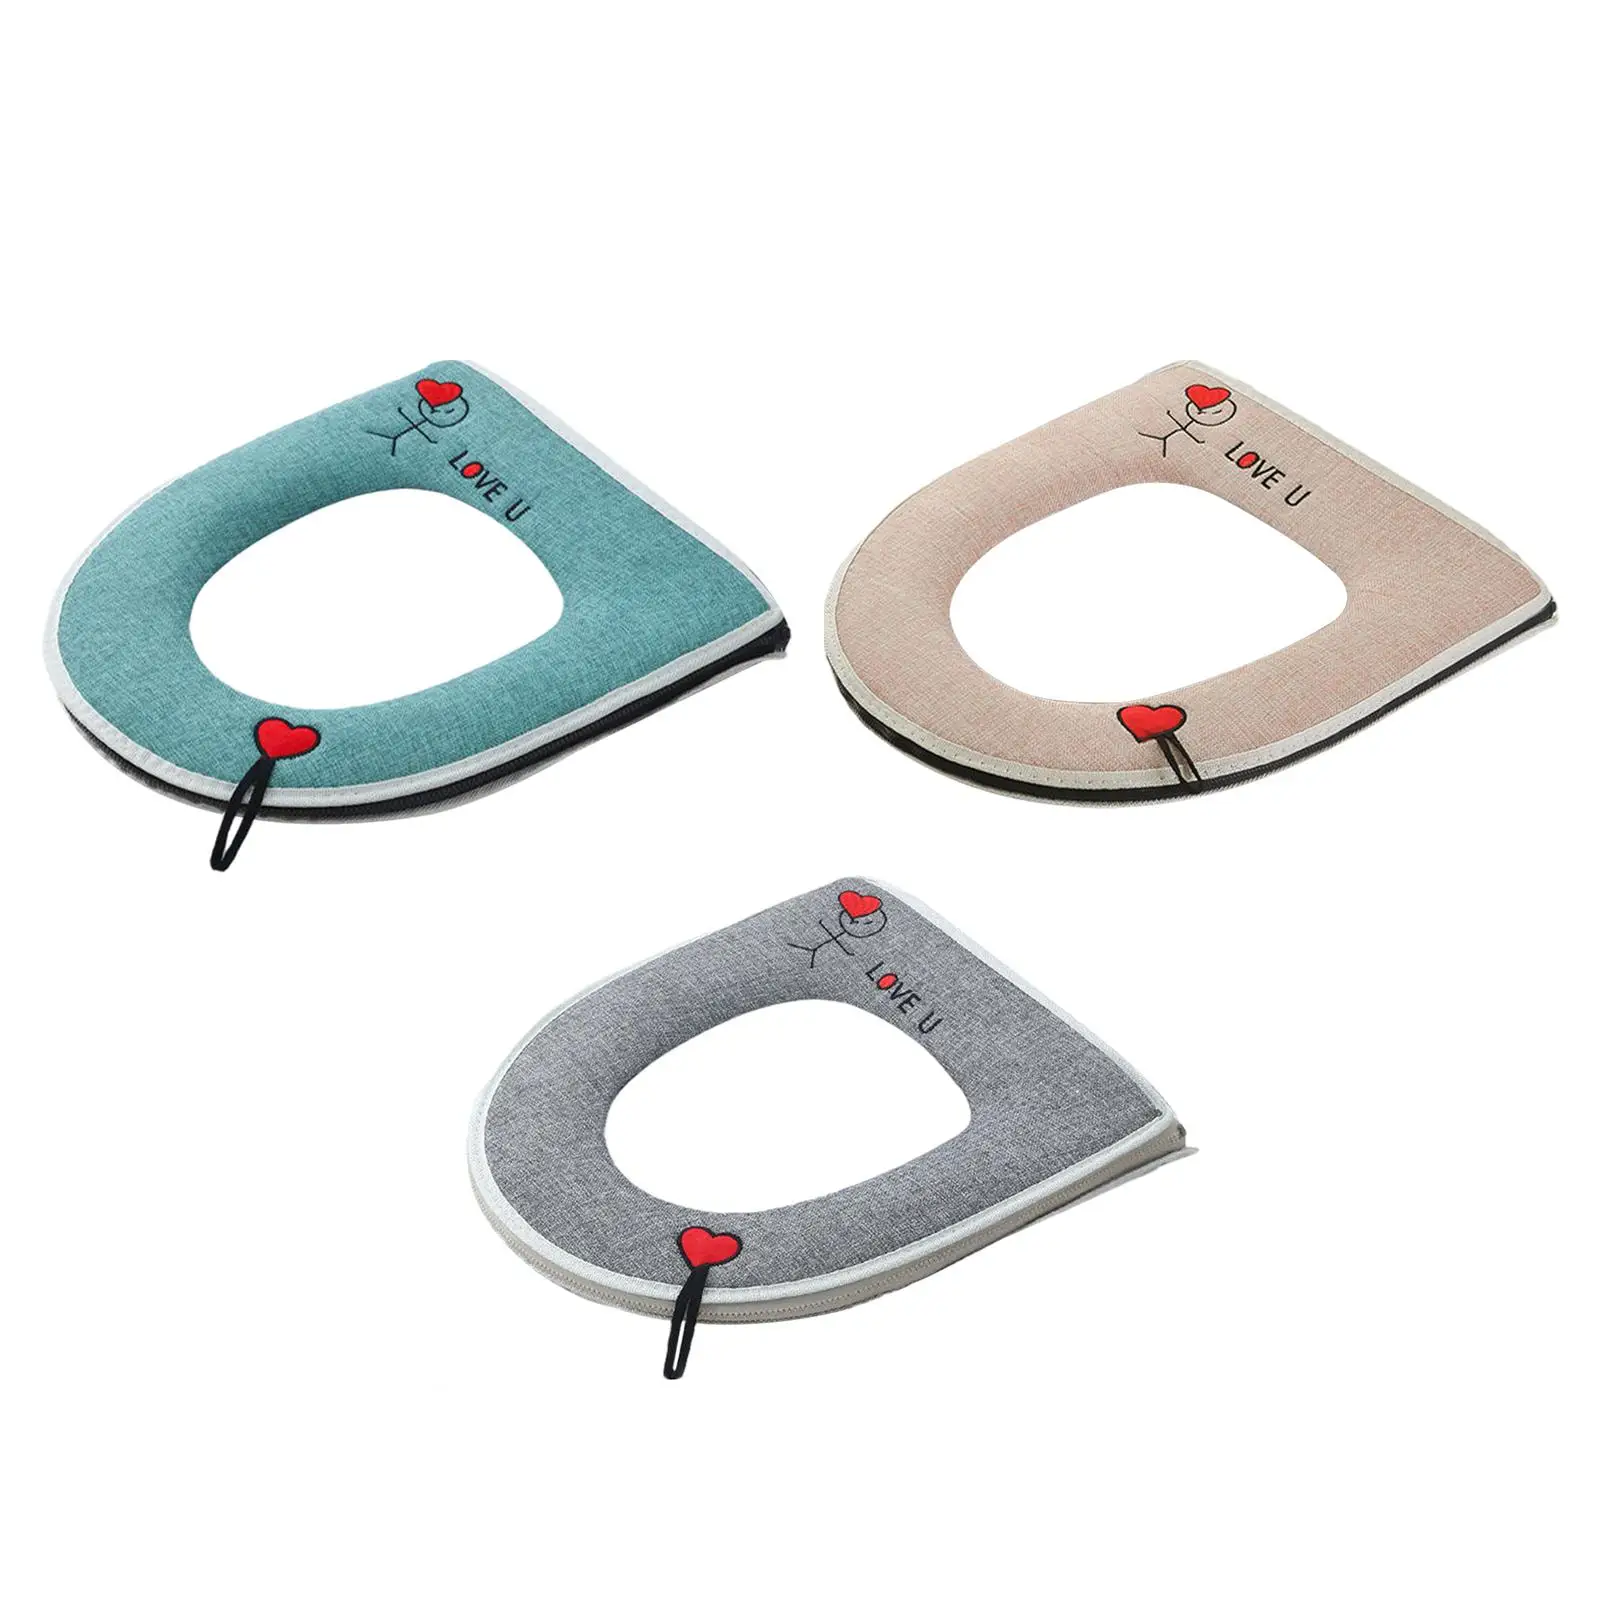 Toilet Seat Cushion Breatheable with Handle and Zipper Soft Washable Easy to Clean Toilet Seat Cover for Home Traveling Hotel